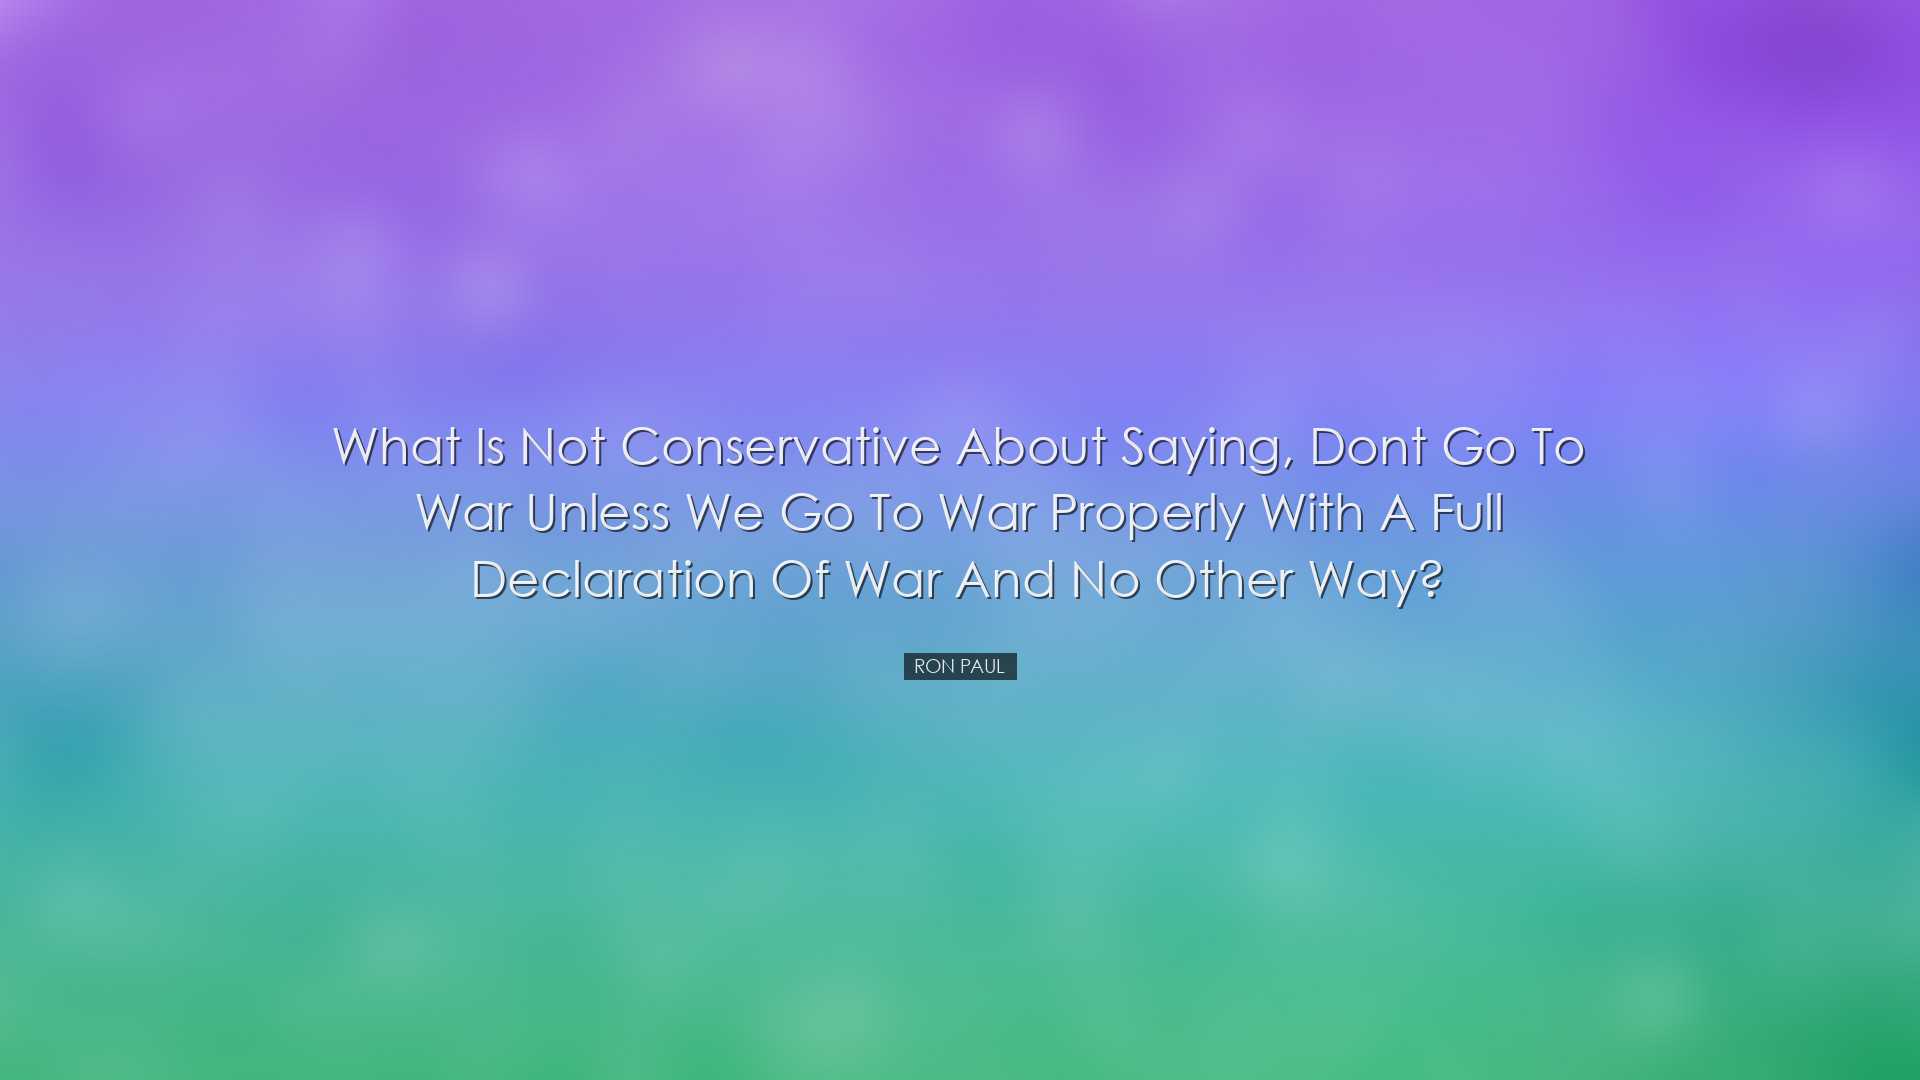 What is not conservative about saying, Dont go to war unless we go